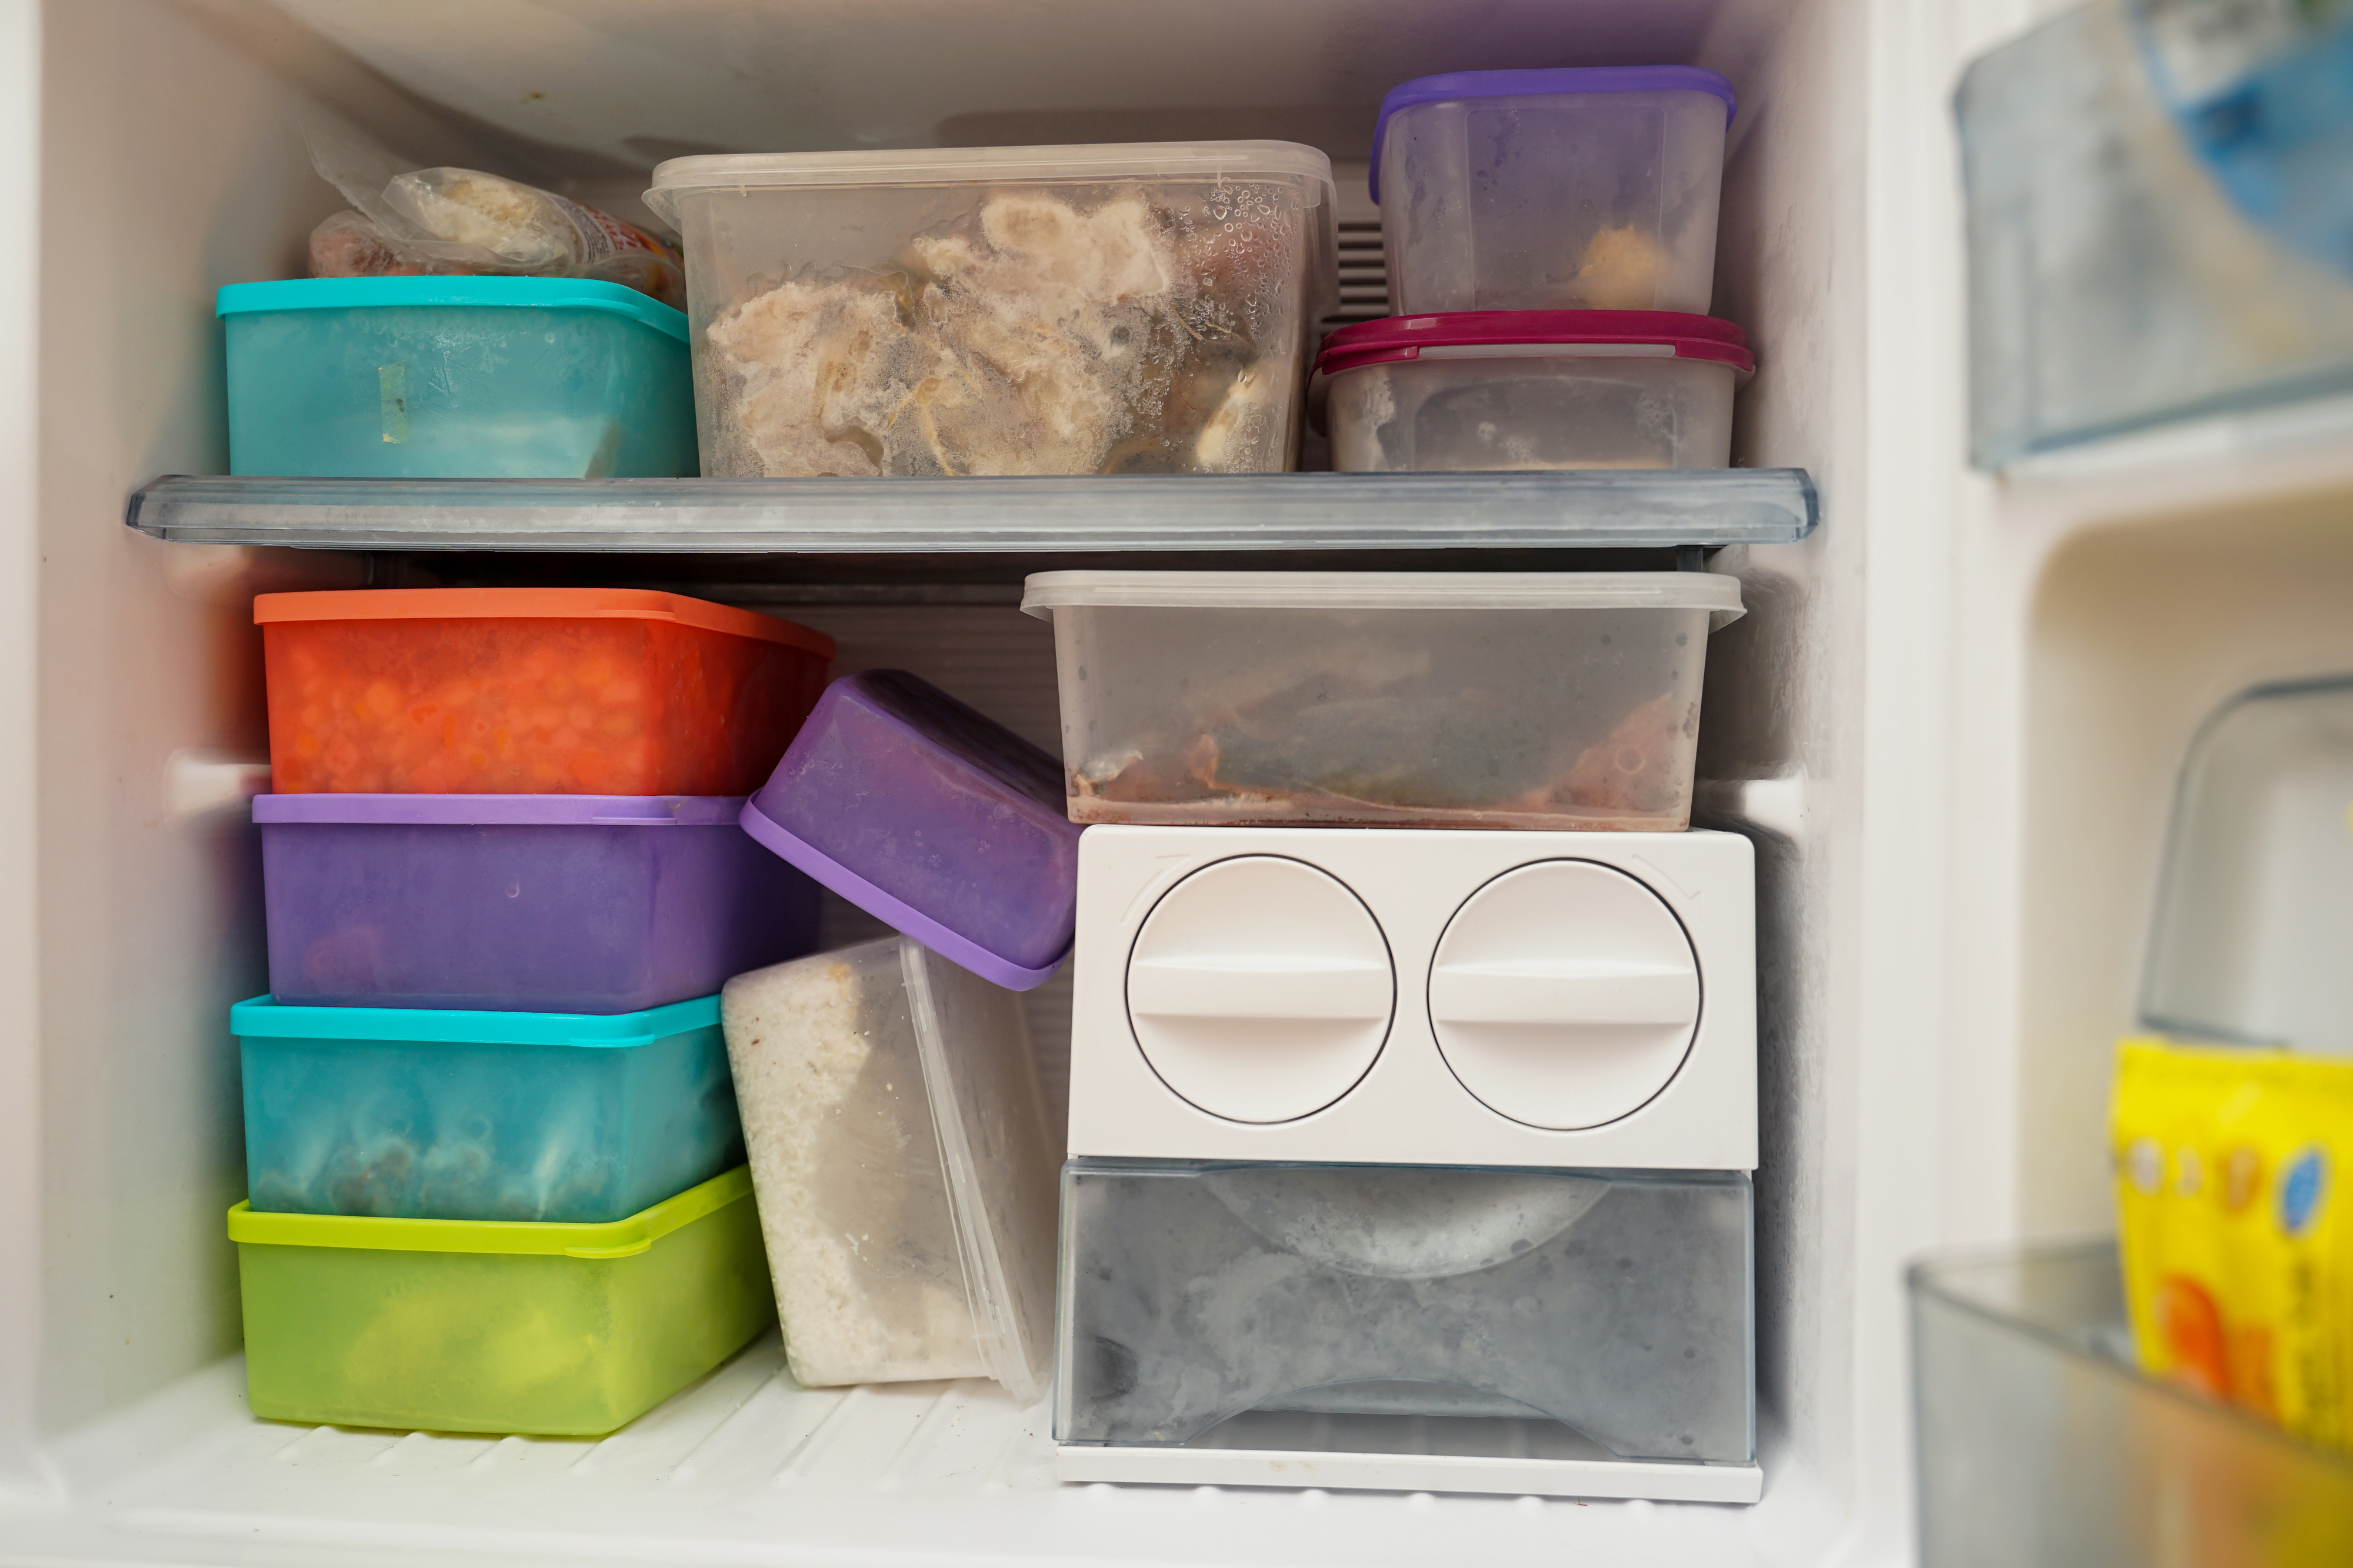 A freezer filled with various stacked food storage containers and an ice cube tray